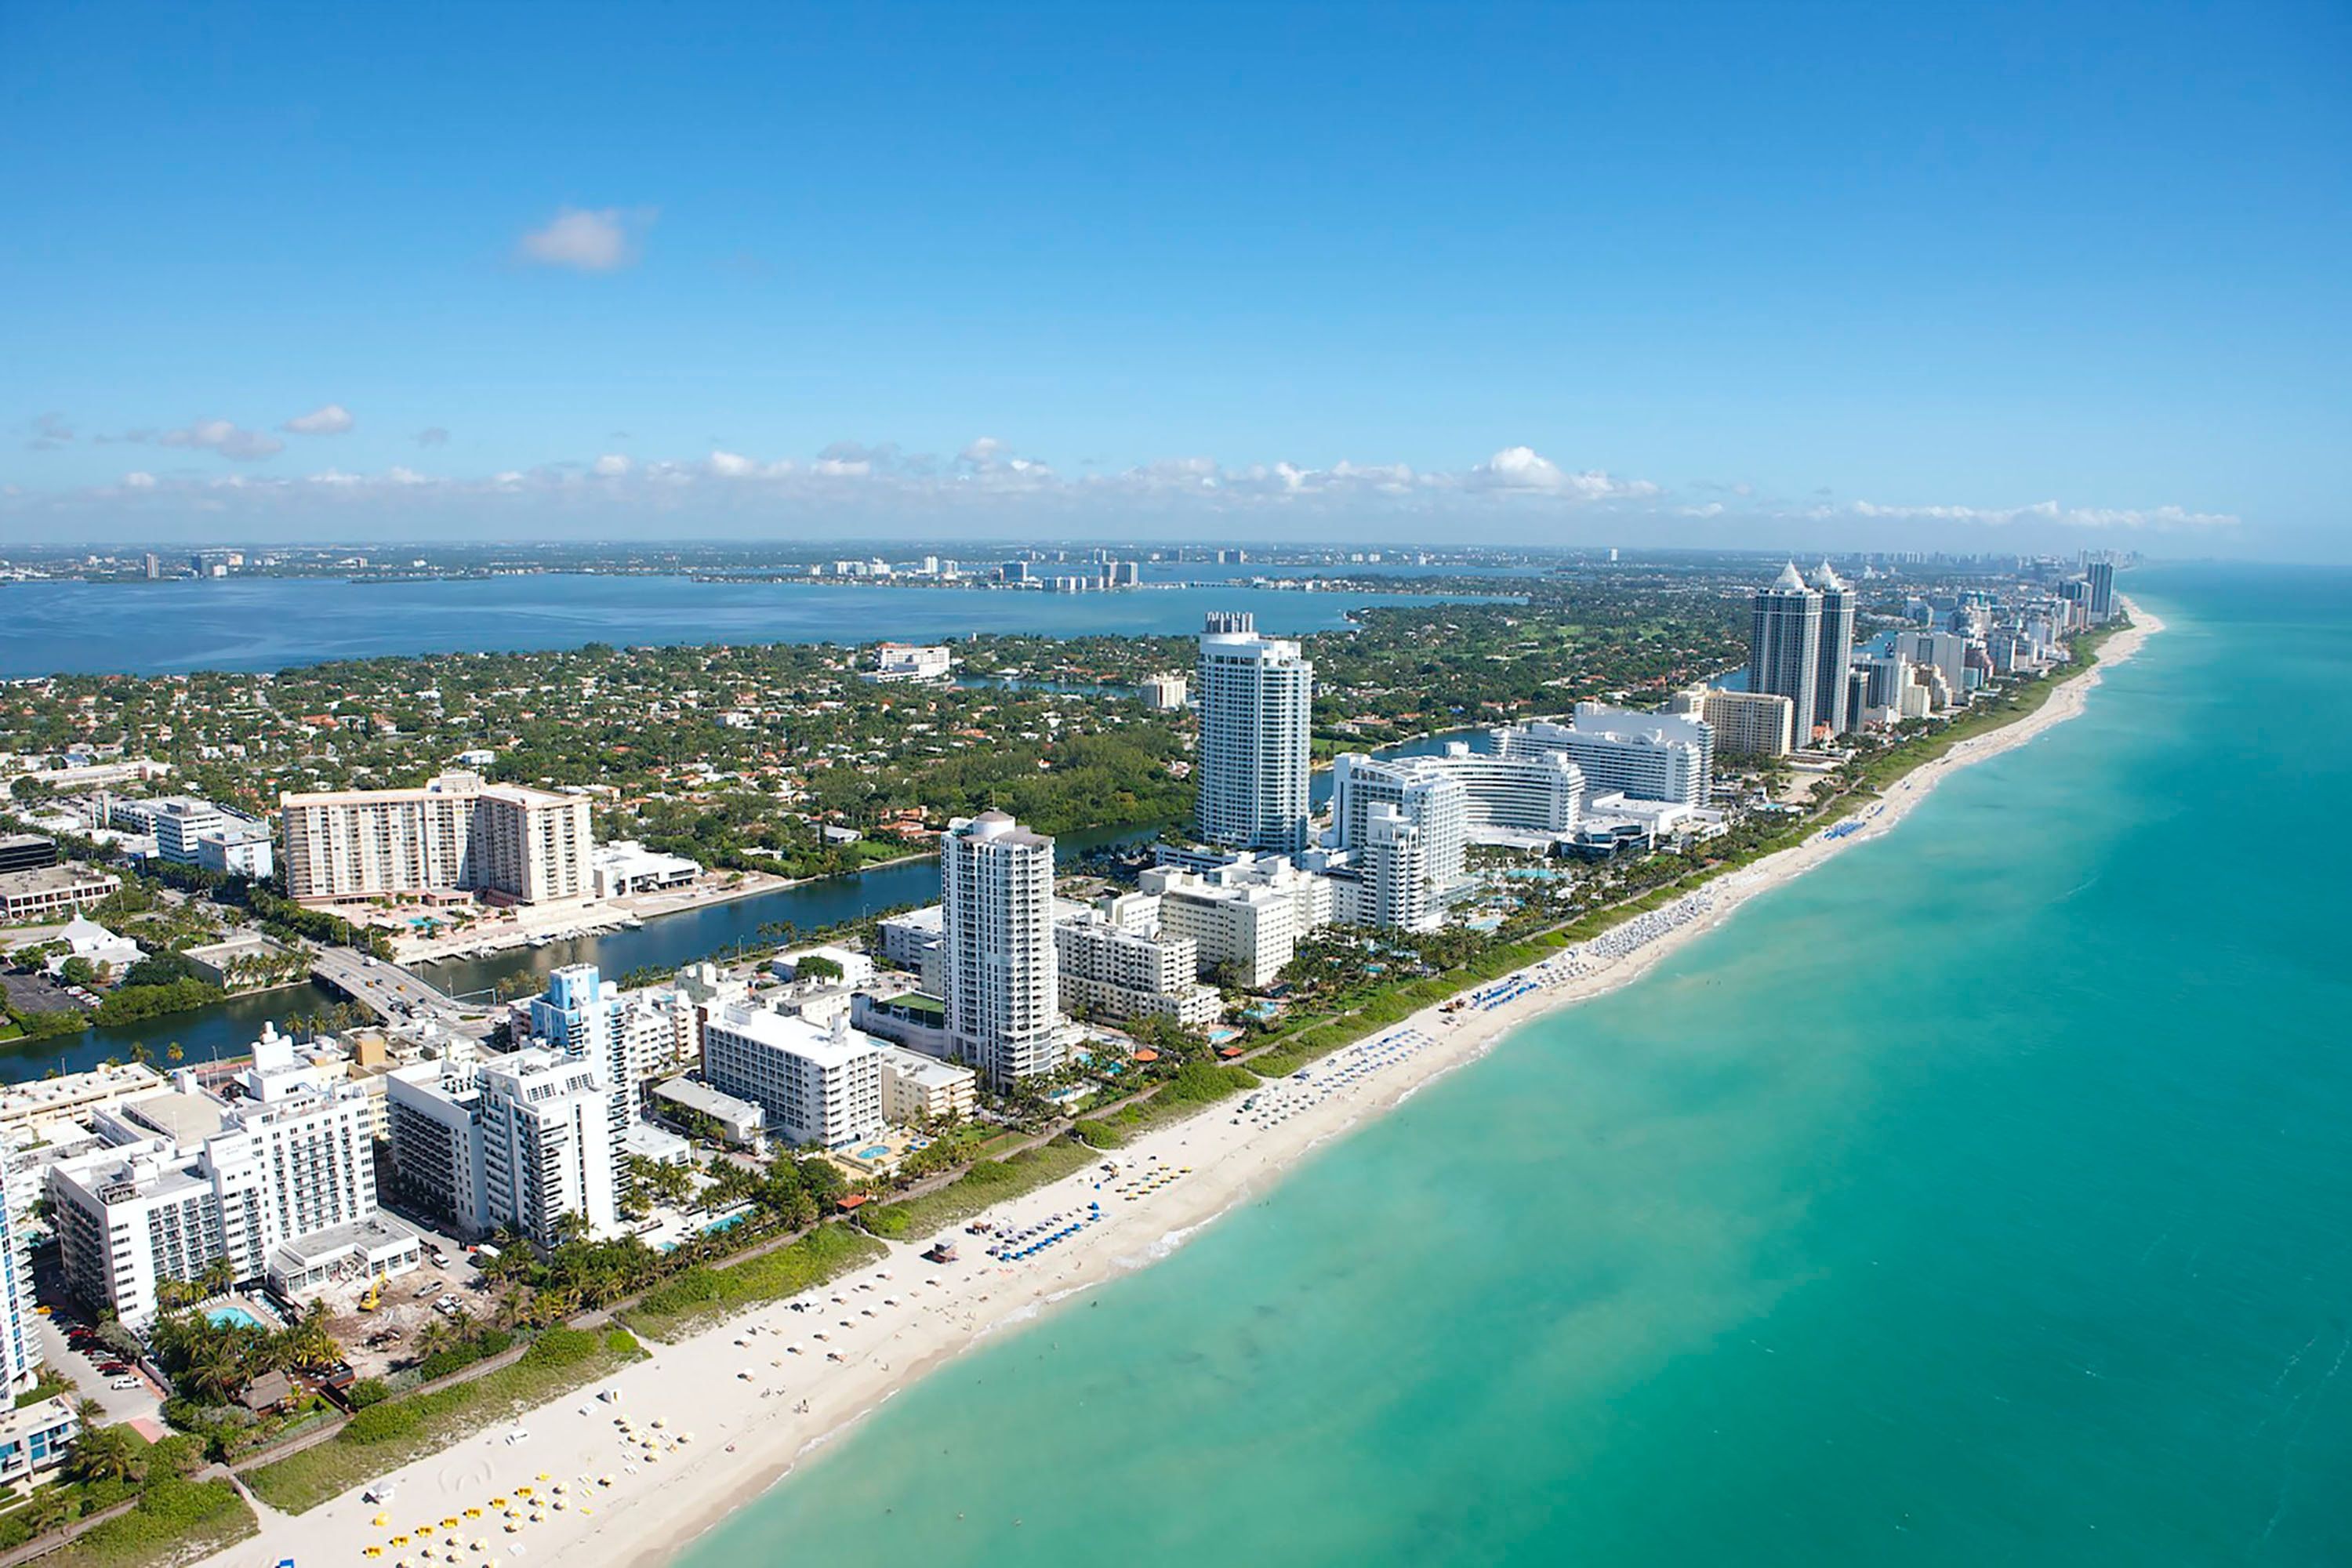 Blue waters and white sand beach with tall buildings on shore 